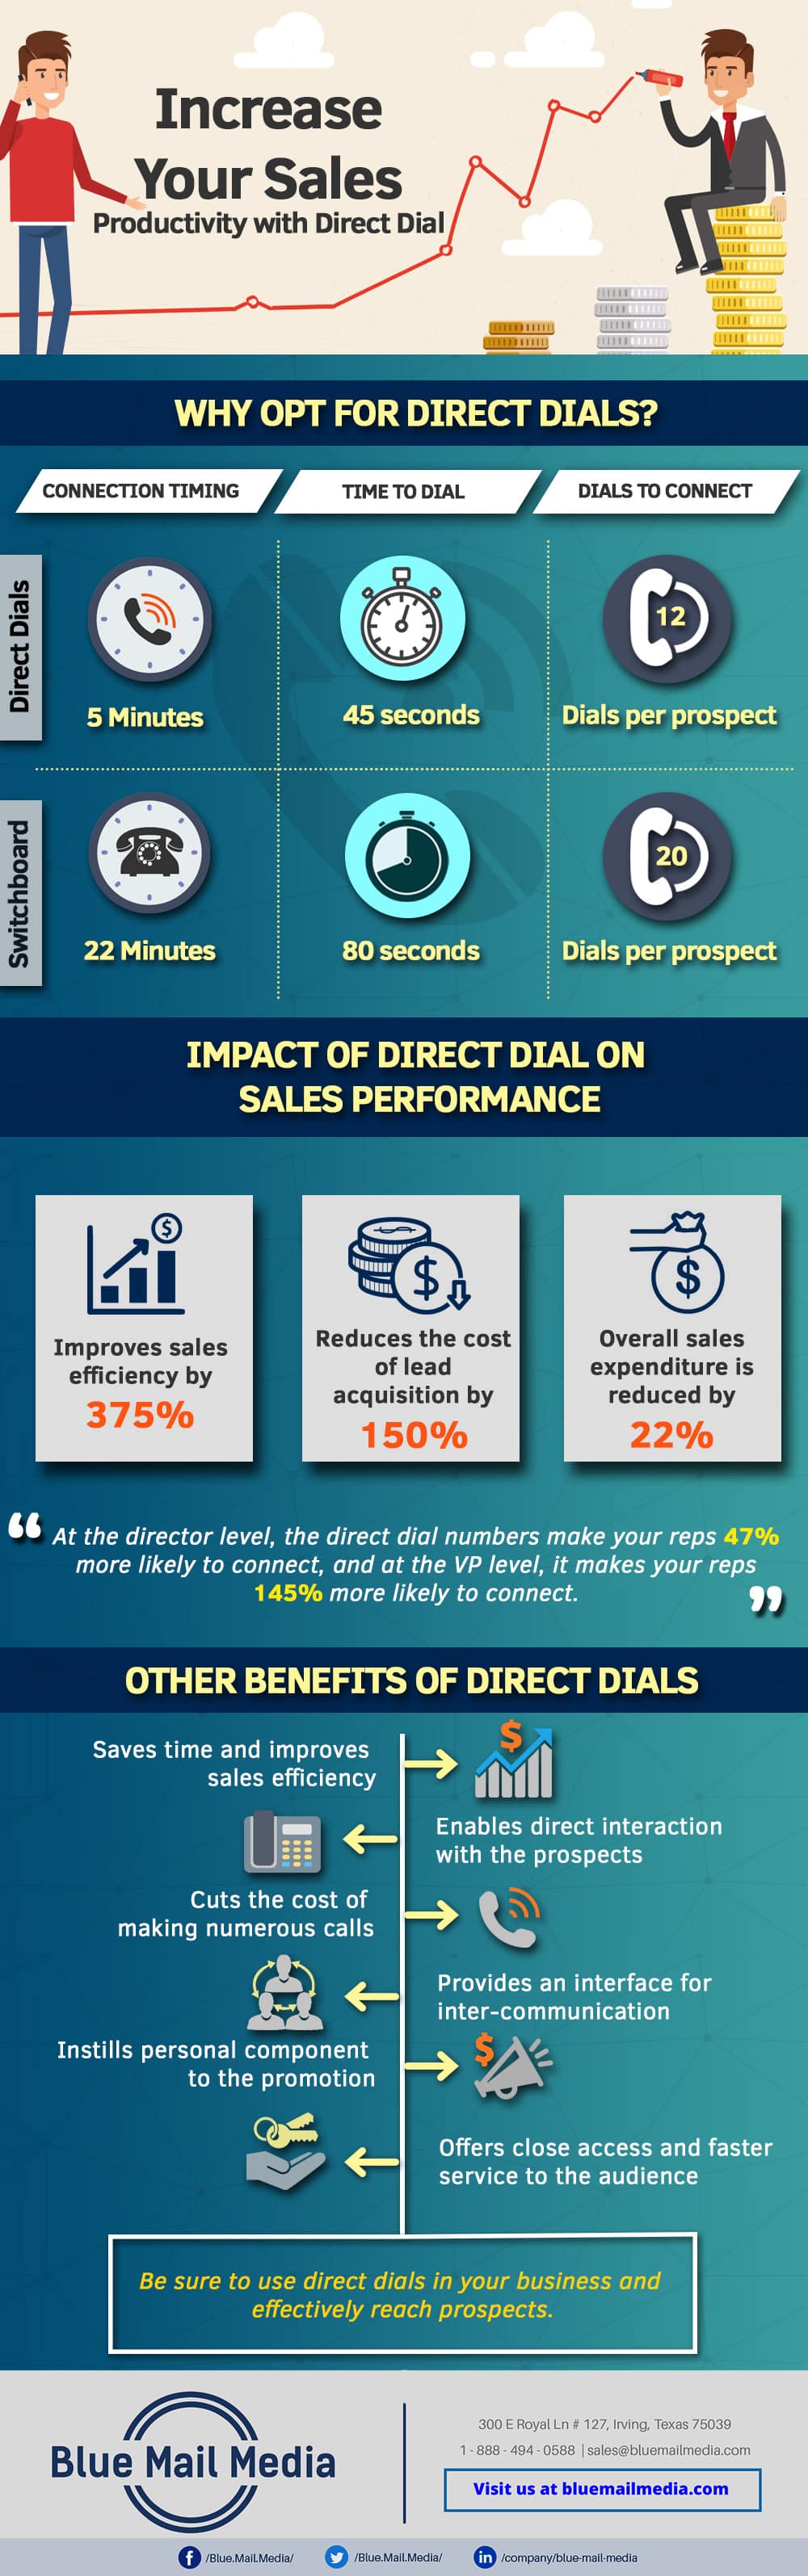 Increase Your Sales Productivity with Direct Dial